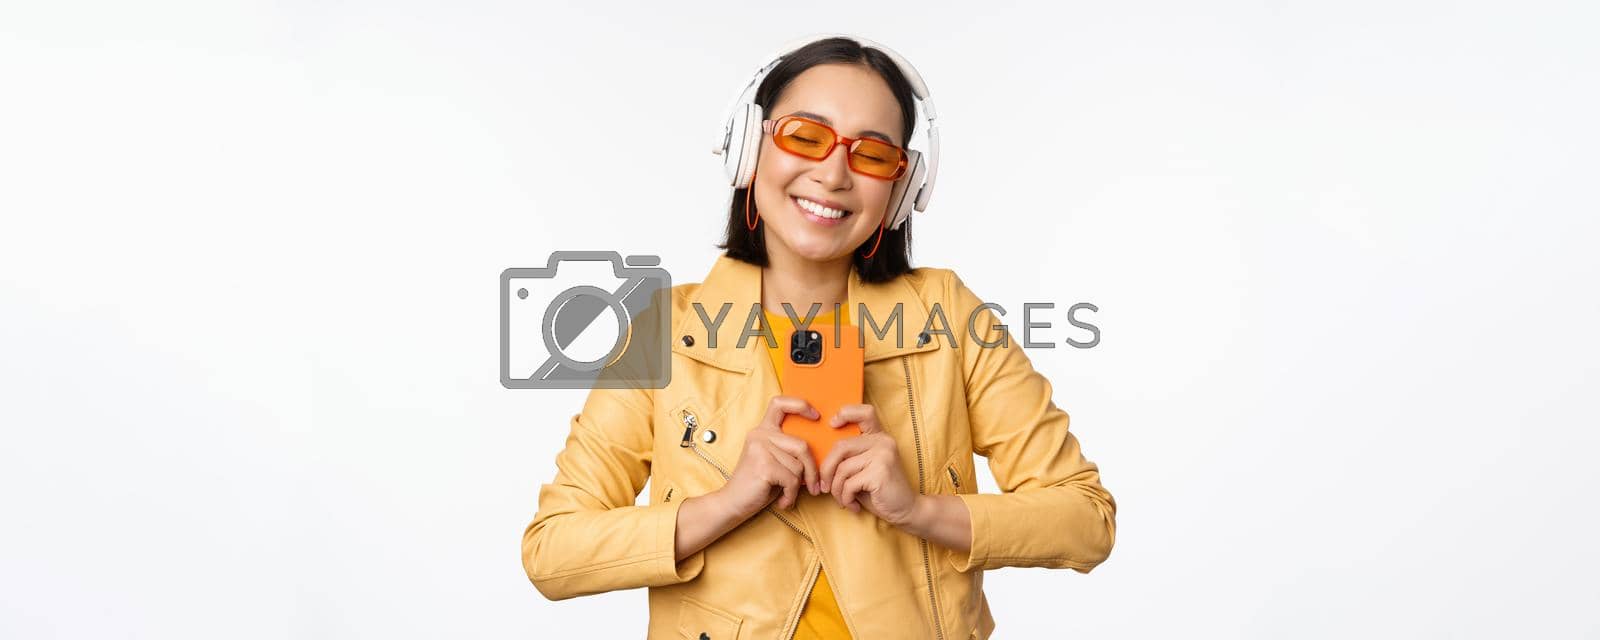 Technology concept. Stylish asian girl in headphones, holding smartphone, dancing and singing, listening music, standing over white background.